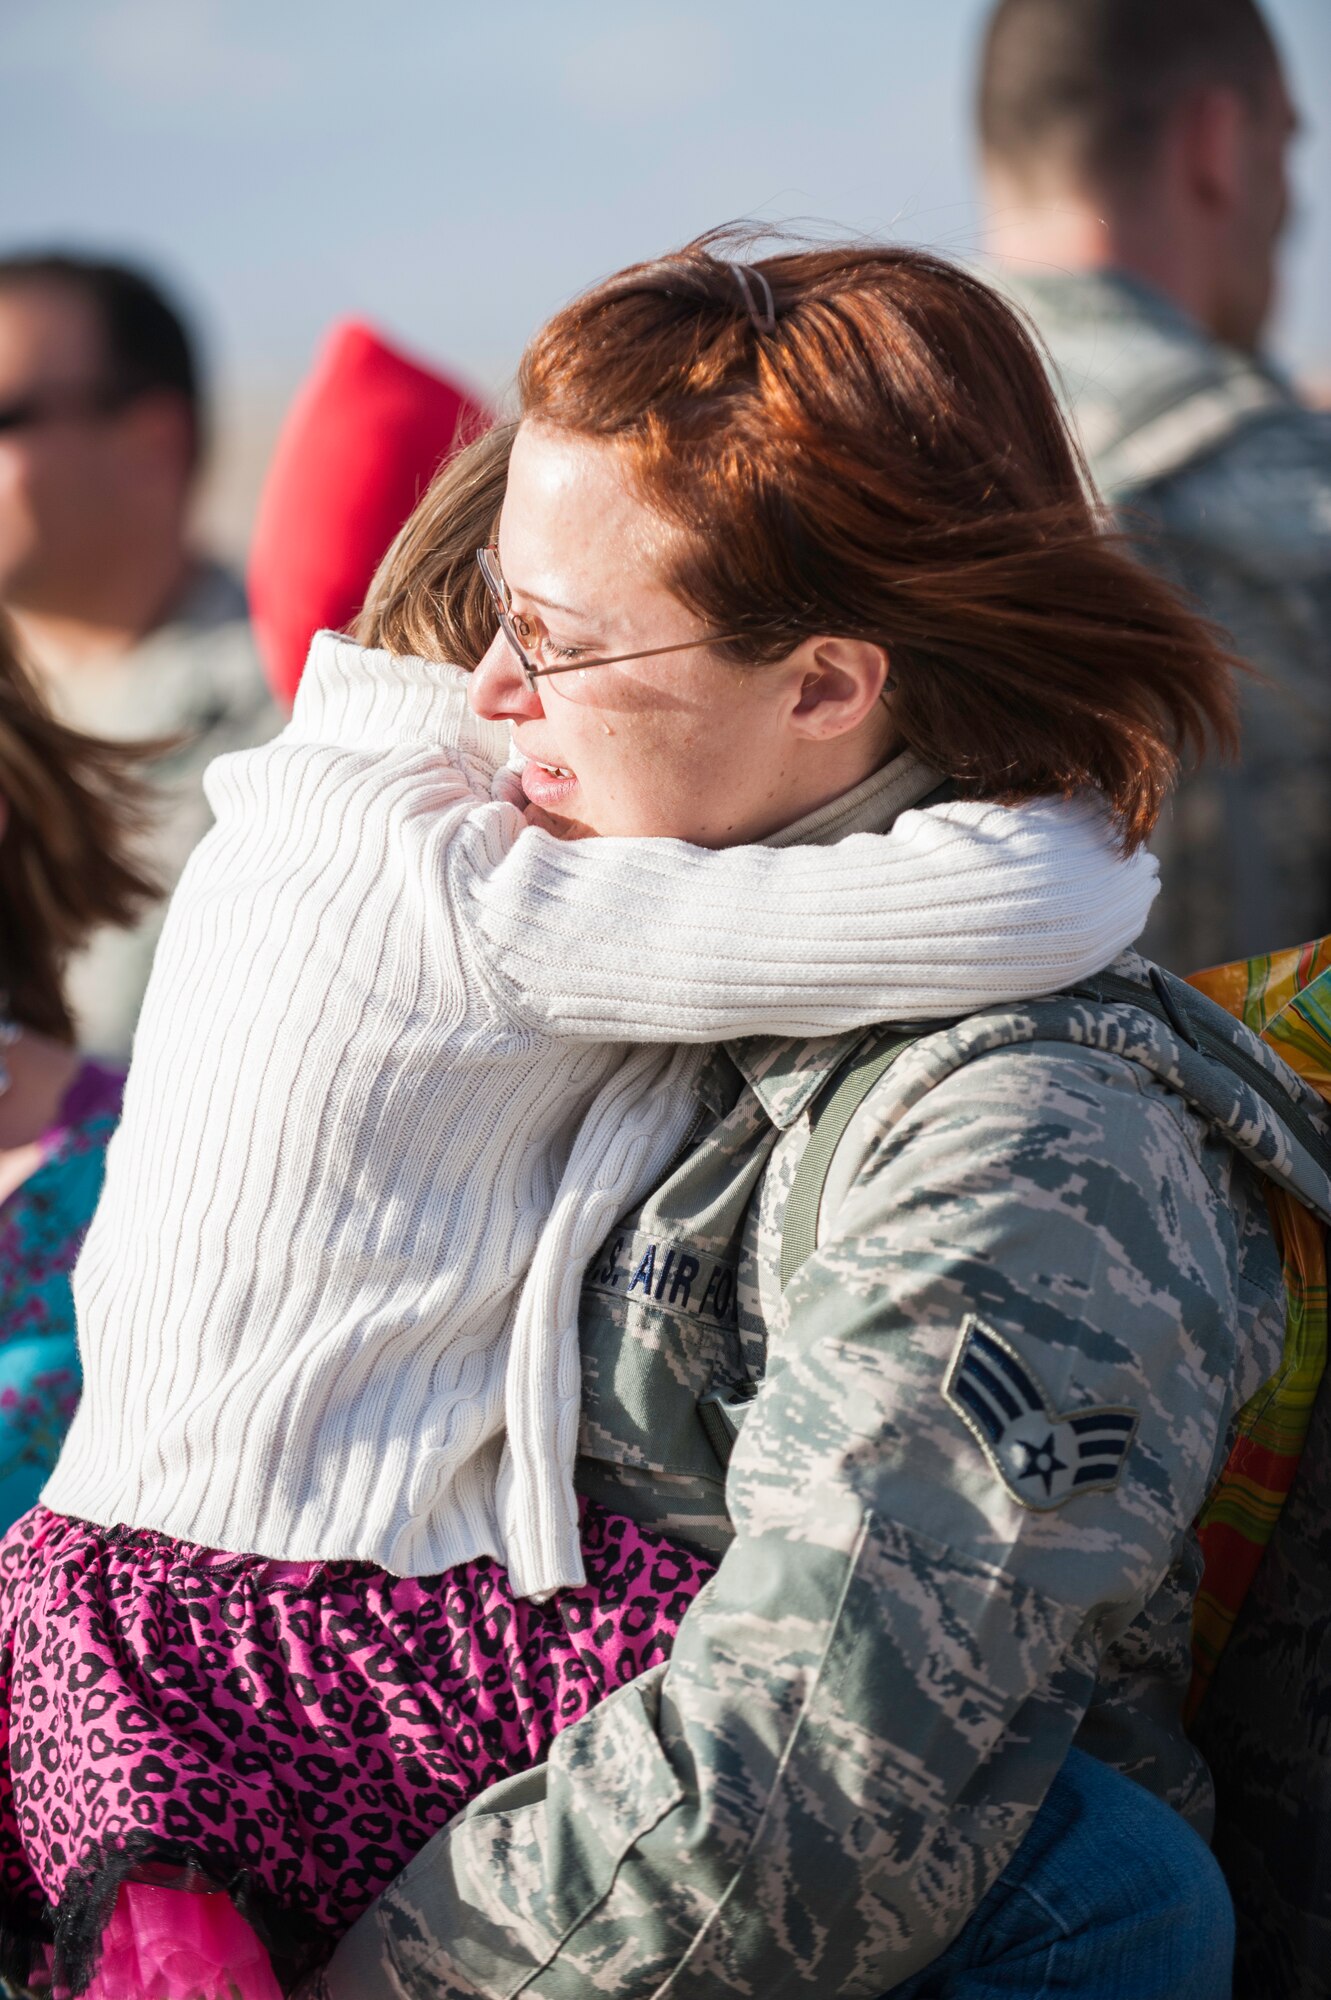 A Senior Airman returning from deployment greets her daughter after landing on the Holloman AFB, N.M., flightline Jan. 28.  F-22 Raptors and around 200 personnel returned Monday from a 9-month deployment to Southwest Asia ensuring regional security and joint tactical air operations.  (U.S. Air Force Photo by 1st Lt. Stephanie Schonberger/Released)